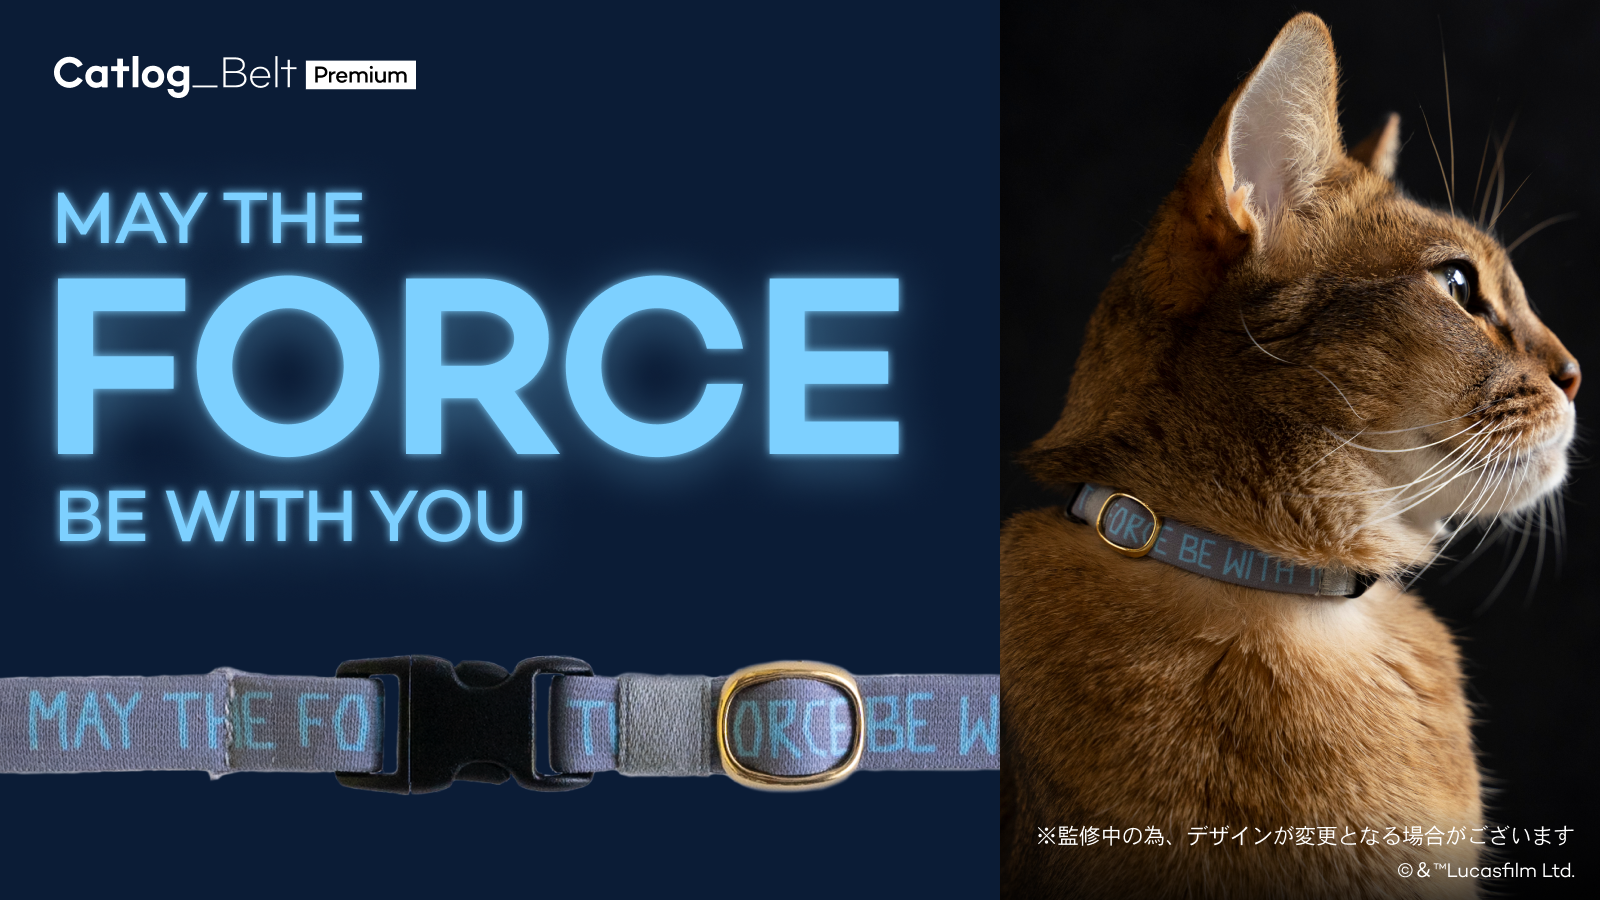 Catlog Belt Premium May the Force be with you